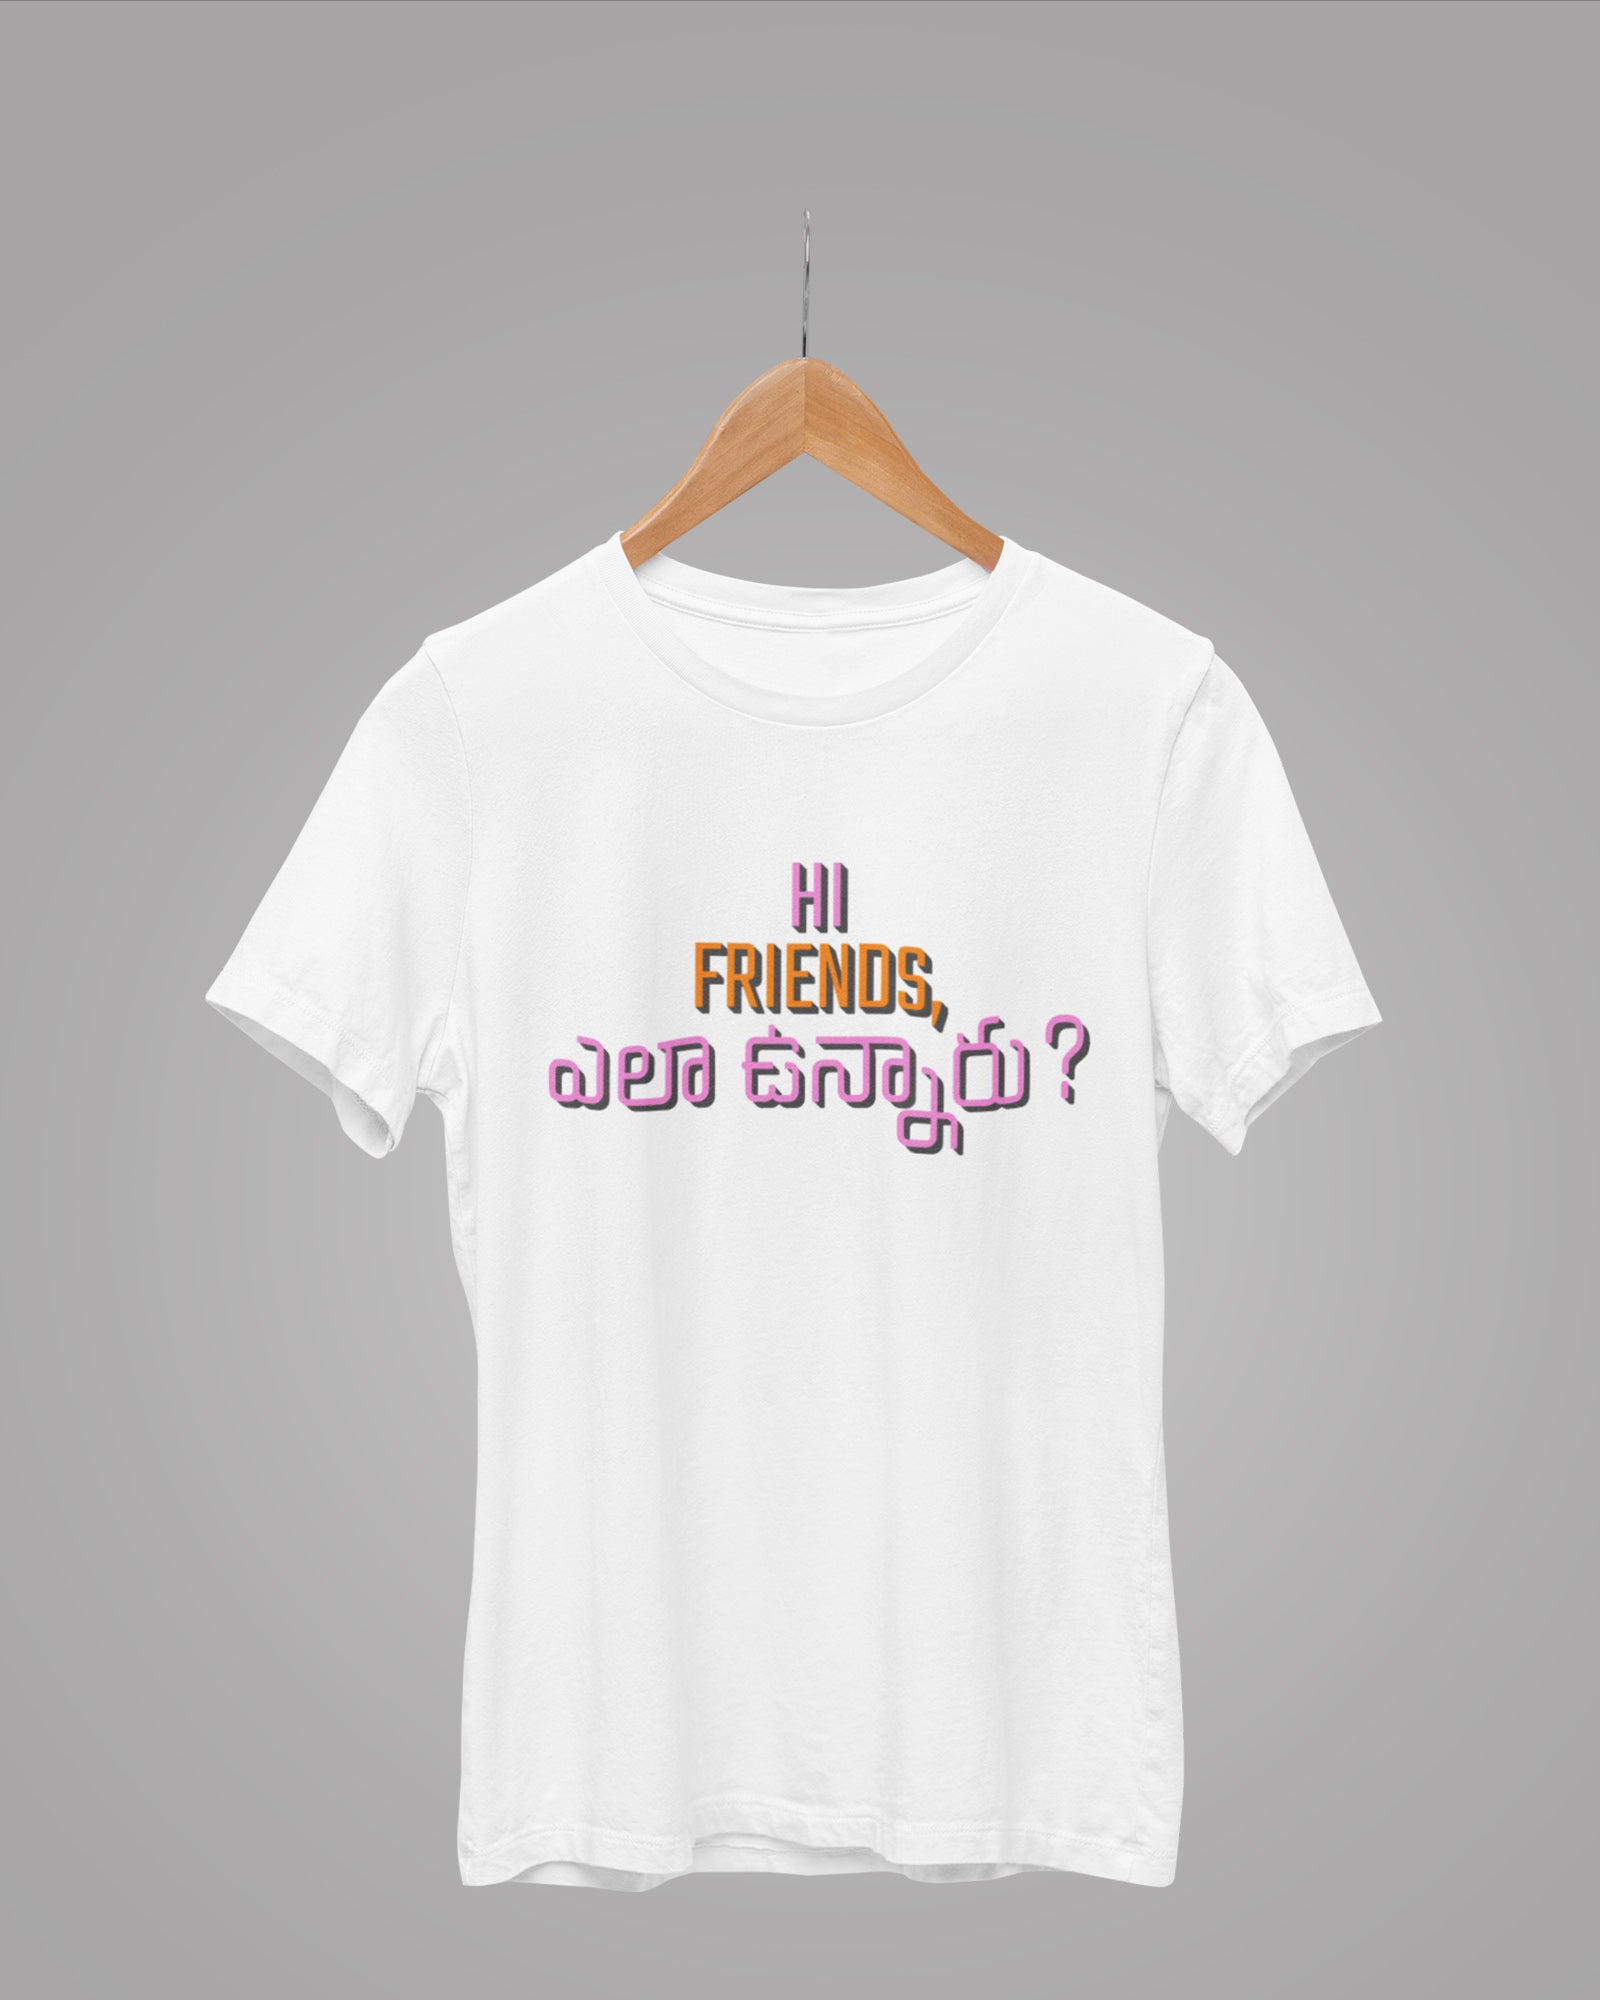 Hi Friends, How Are You? Tshirt